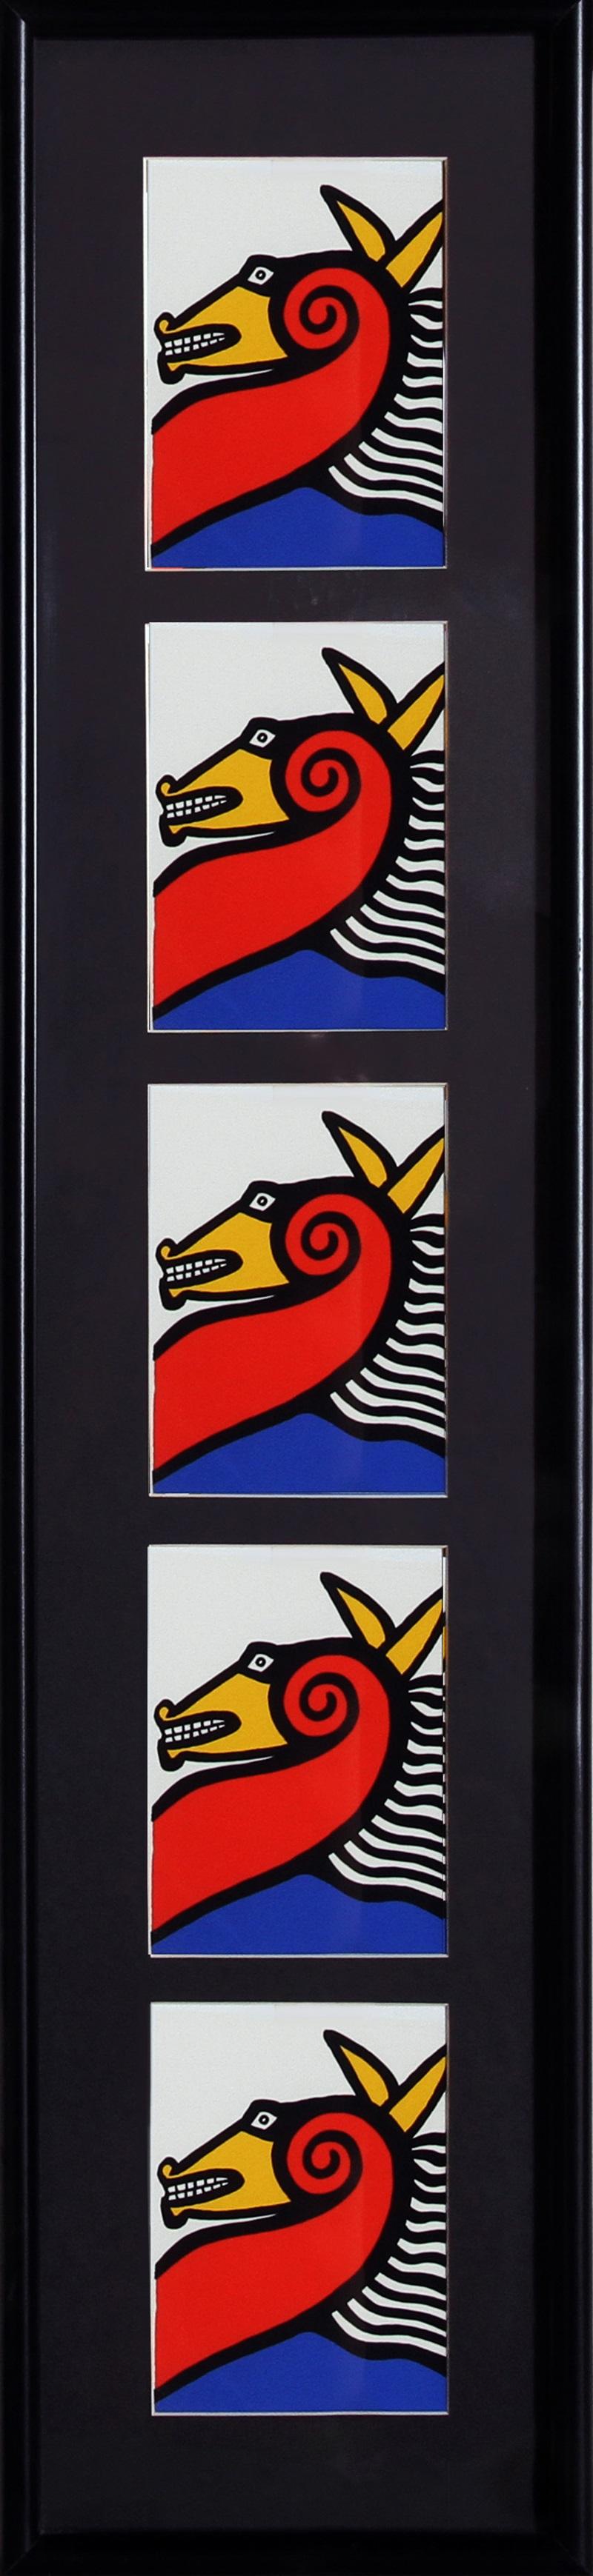 Alexander Calder, After, American (1898 - 1976) -  Seahorses. Medium: Set of Five Lithographs on Card Stock, Image Size: 6.5 x 4.5 inches (each), Size: 36  x 4.75 in. (91.44  x 12.07 cm), Frame Size: 41 x 9.5 inches 